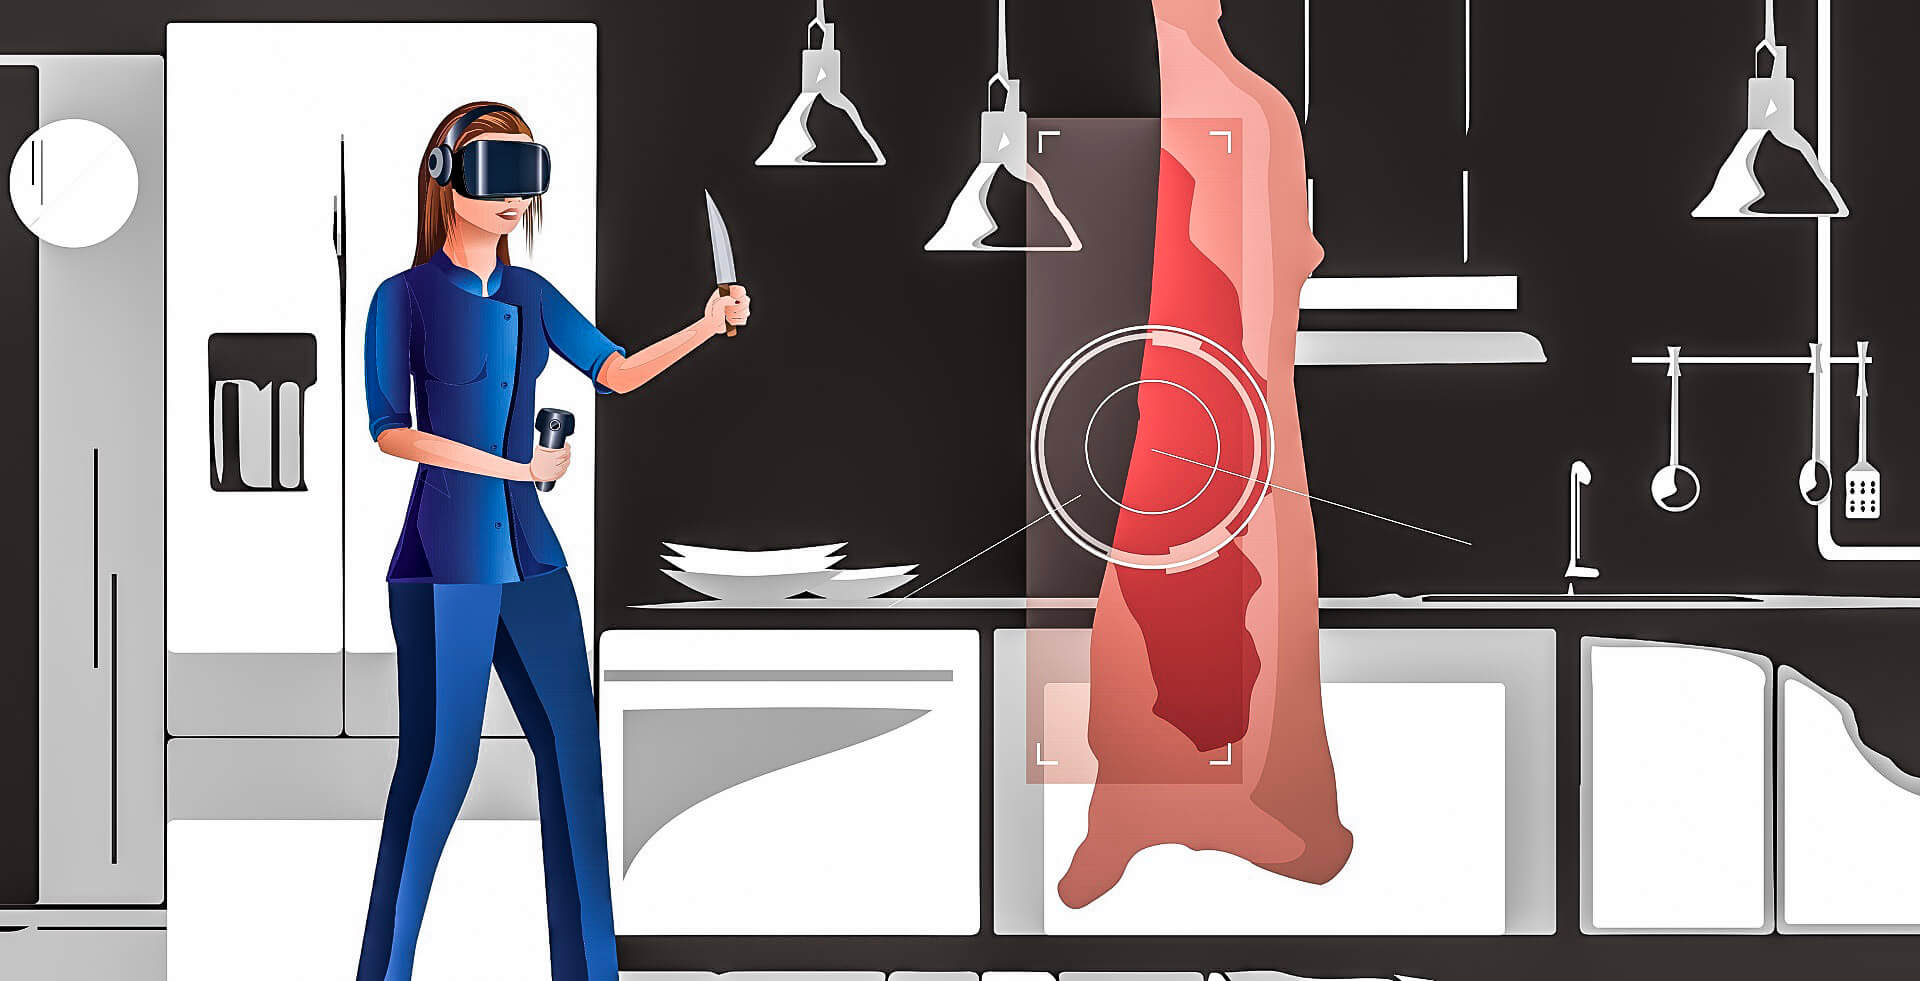 The new reality in foodservice - VR glasses and cotroller are used to train staff